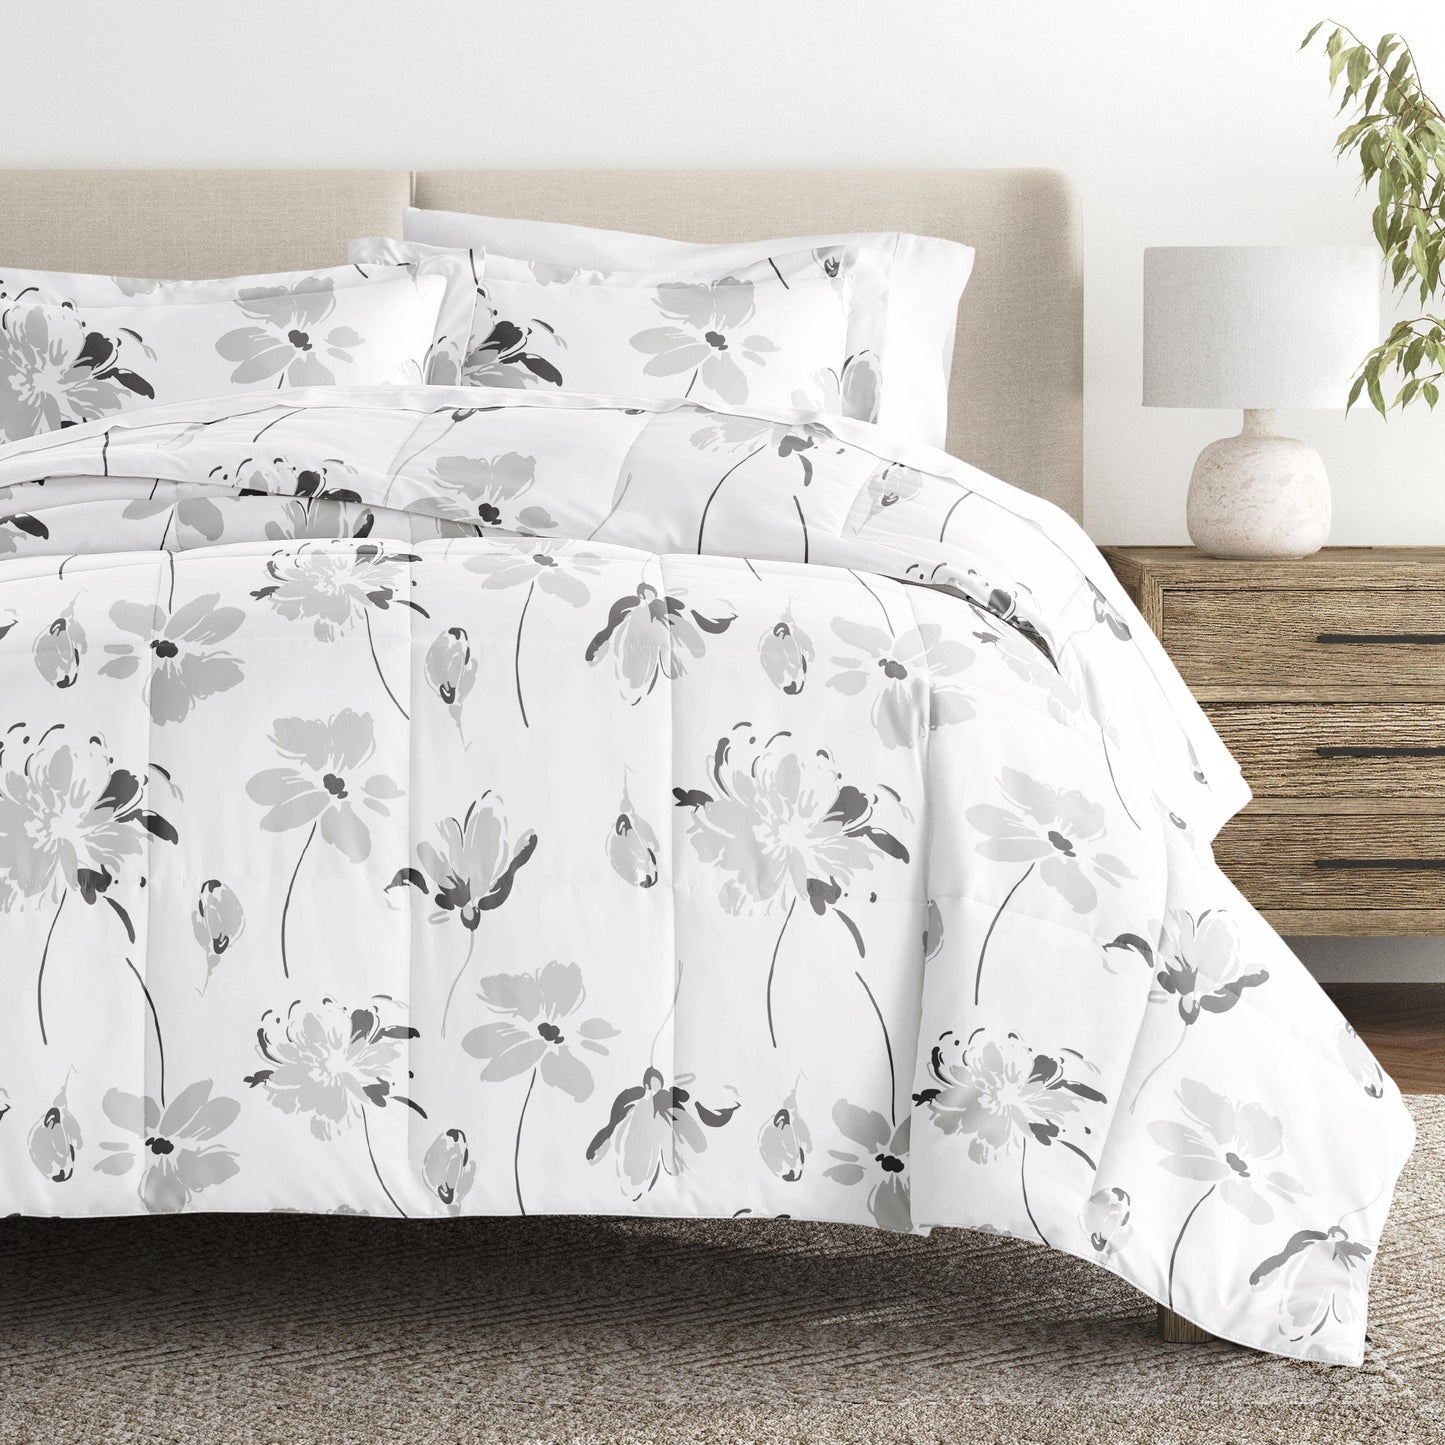 Comforter Sets in Beautiful Patterns – iEnjoy Home